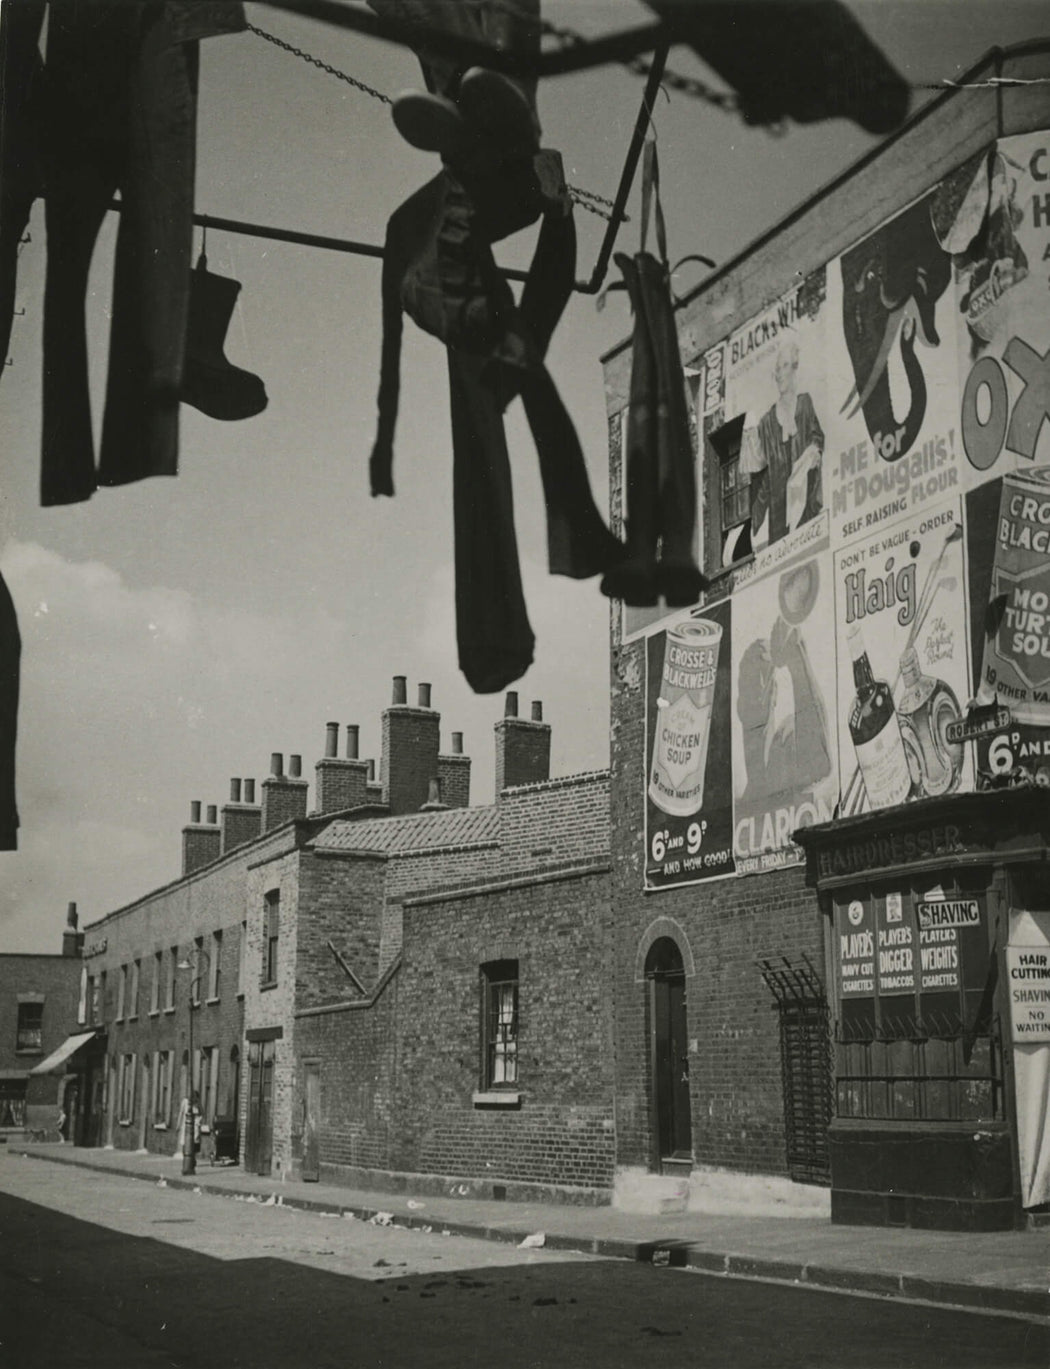 Untitled [street scene with billboard and hanging trinkets]